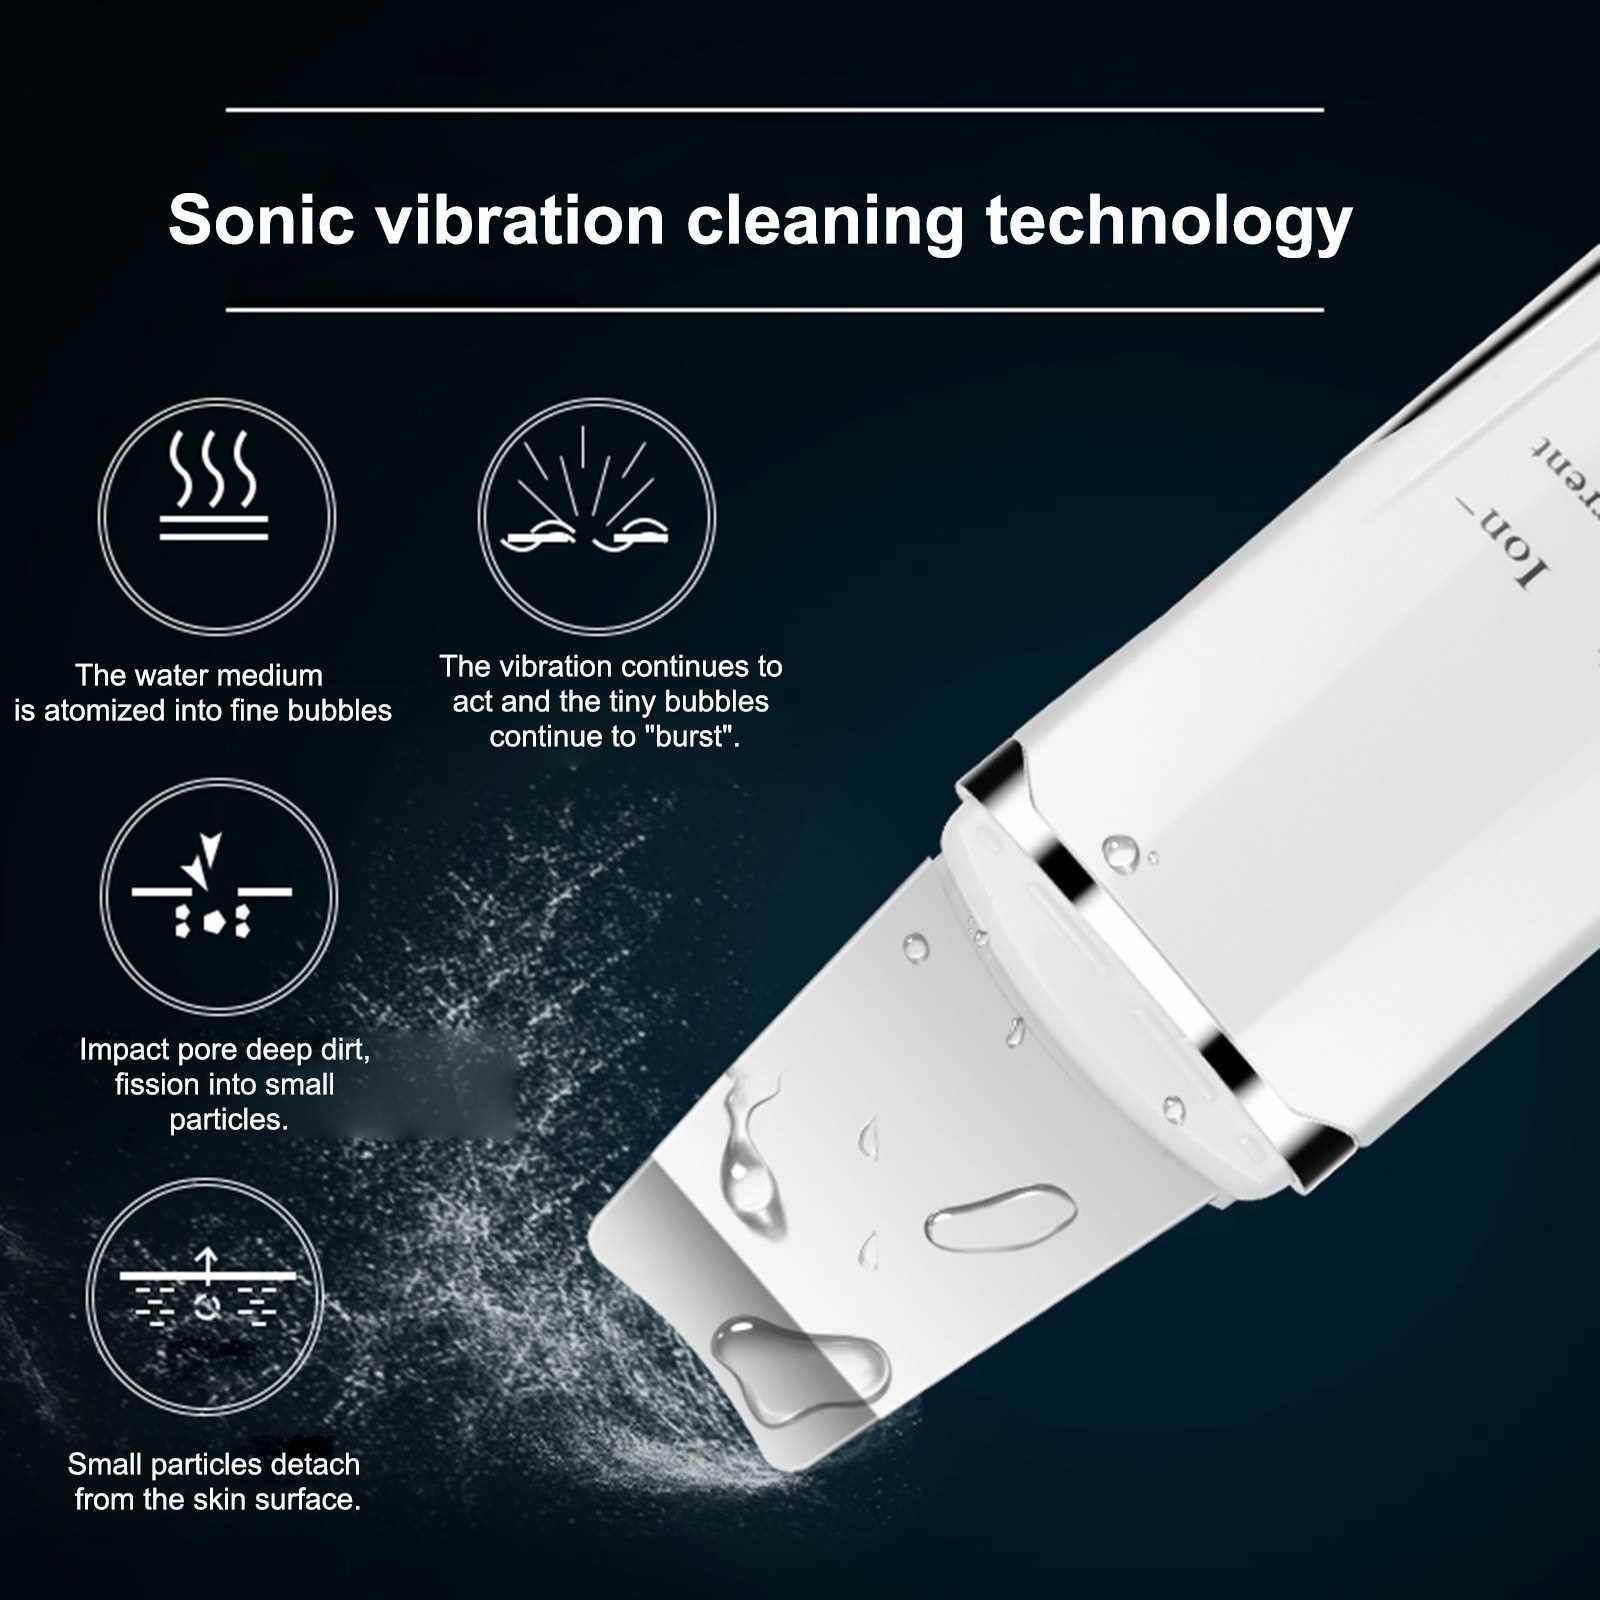 Ultrasonic Shovel Facial Skin Scrubber Skin Spatula Pore Cleanser Ion Cleaner for Blackhead Acne Horniness Cleansing 3 Modes 500mAh USB Charging (Standard)